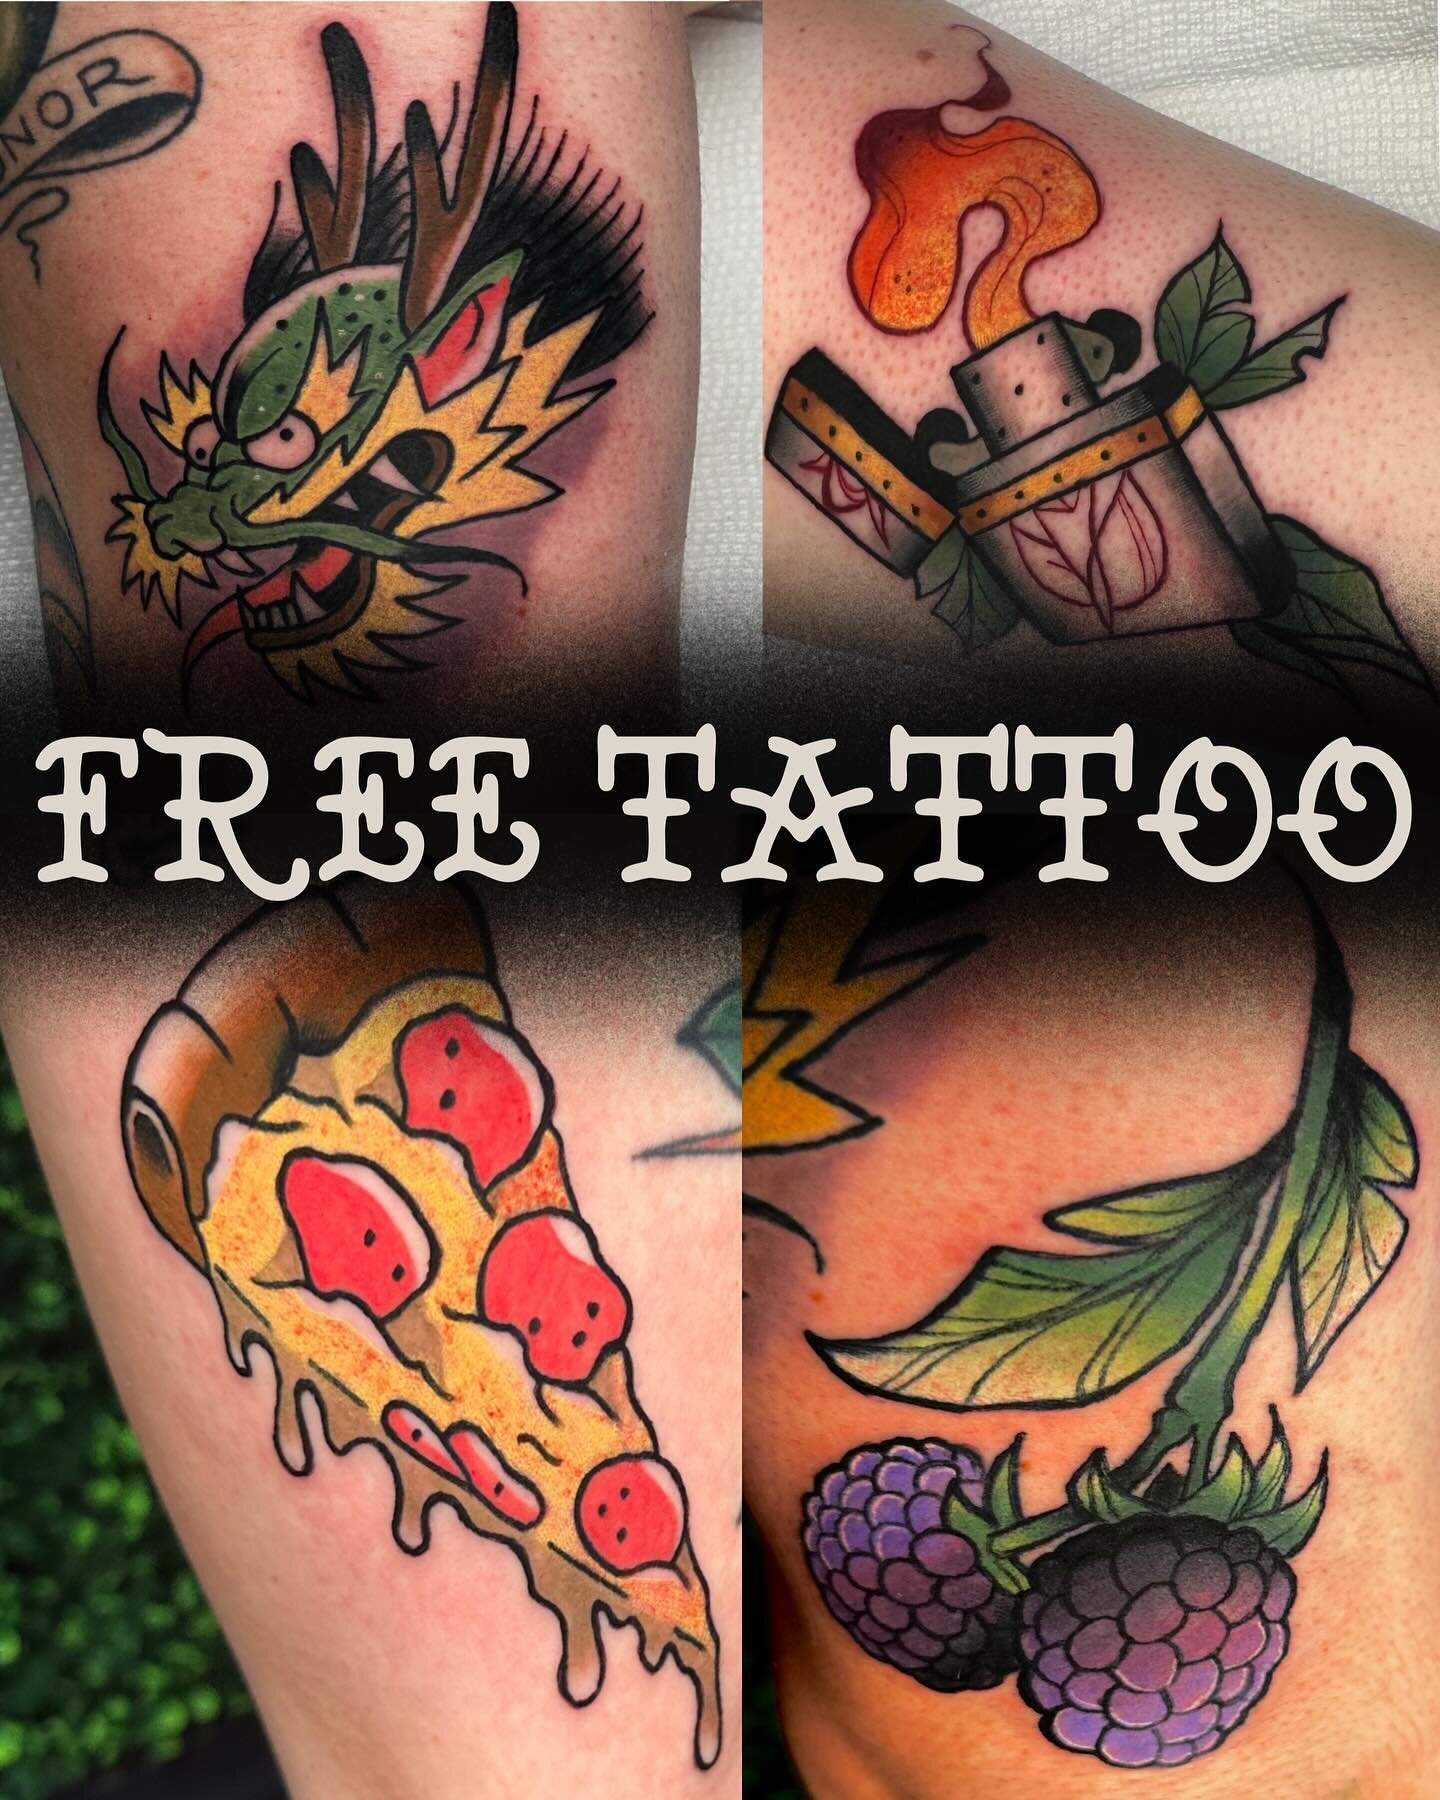 In celebration of hitting 1k we are gonna do a little free tattoo giveaway! I thank you all for the support, the memes and the rizz. 

I&rsquo;m gonna pick a first place winner who will win a large ( hand size ) tattoo of and a second place win a sma